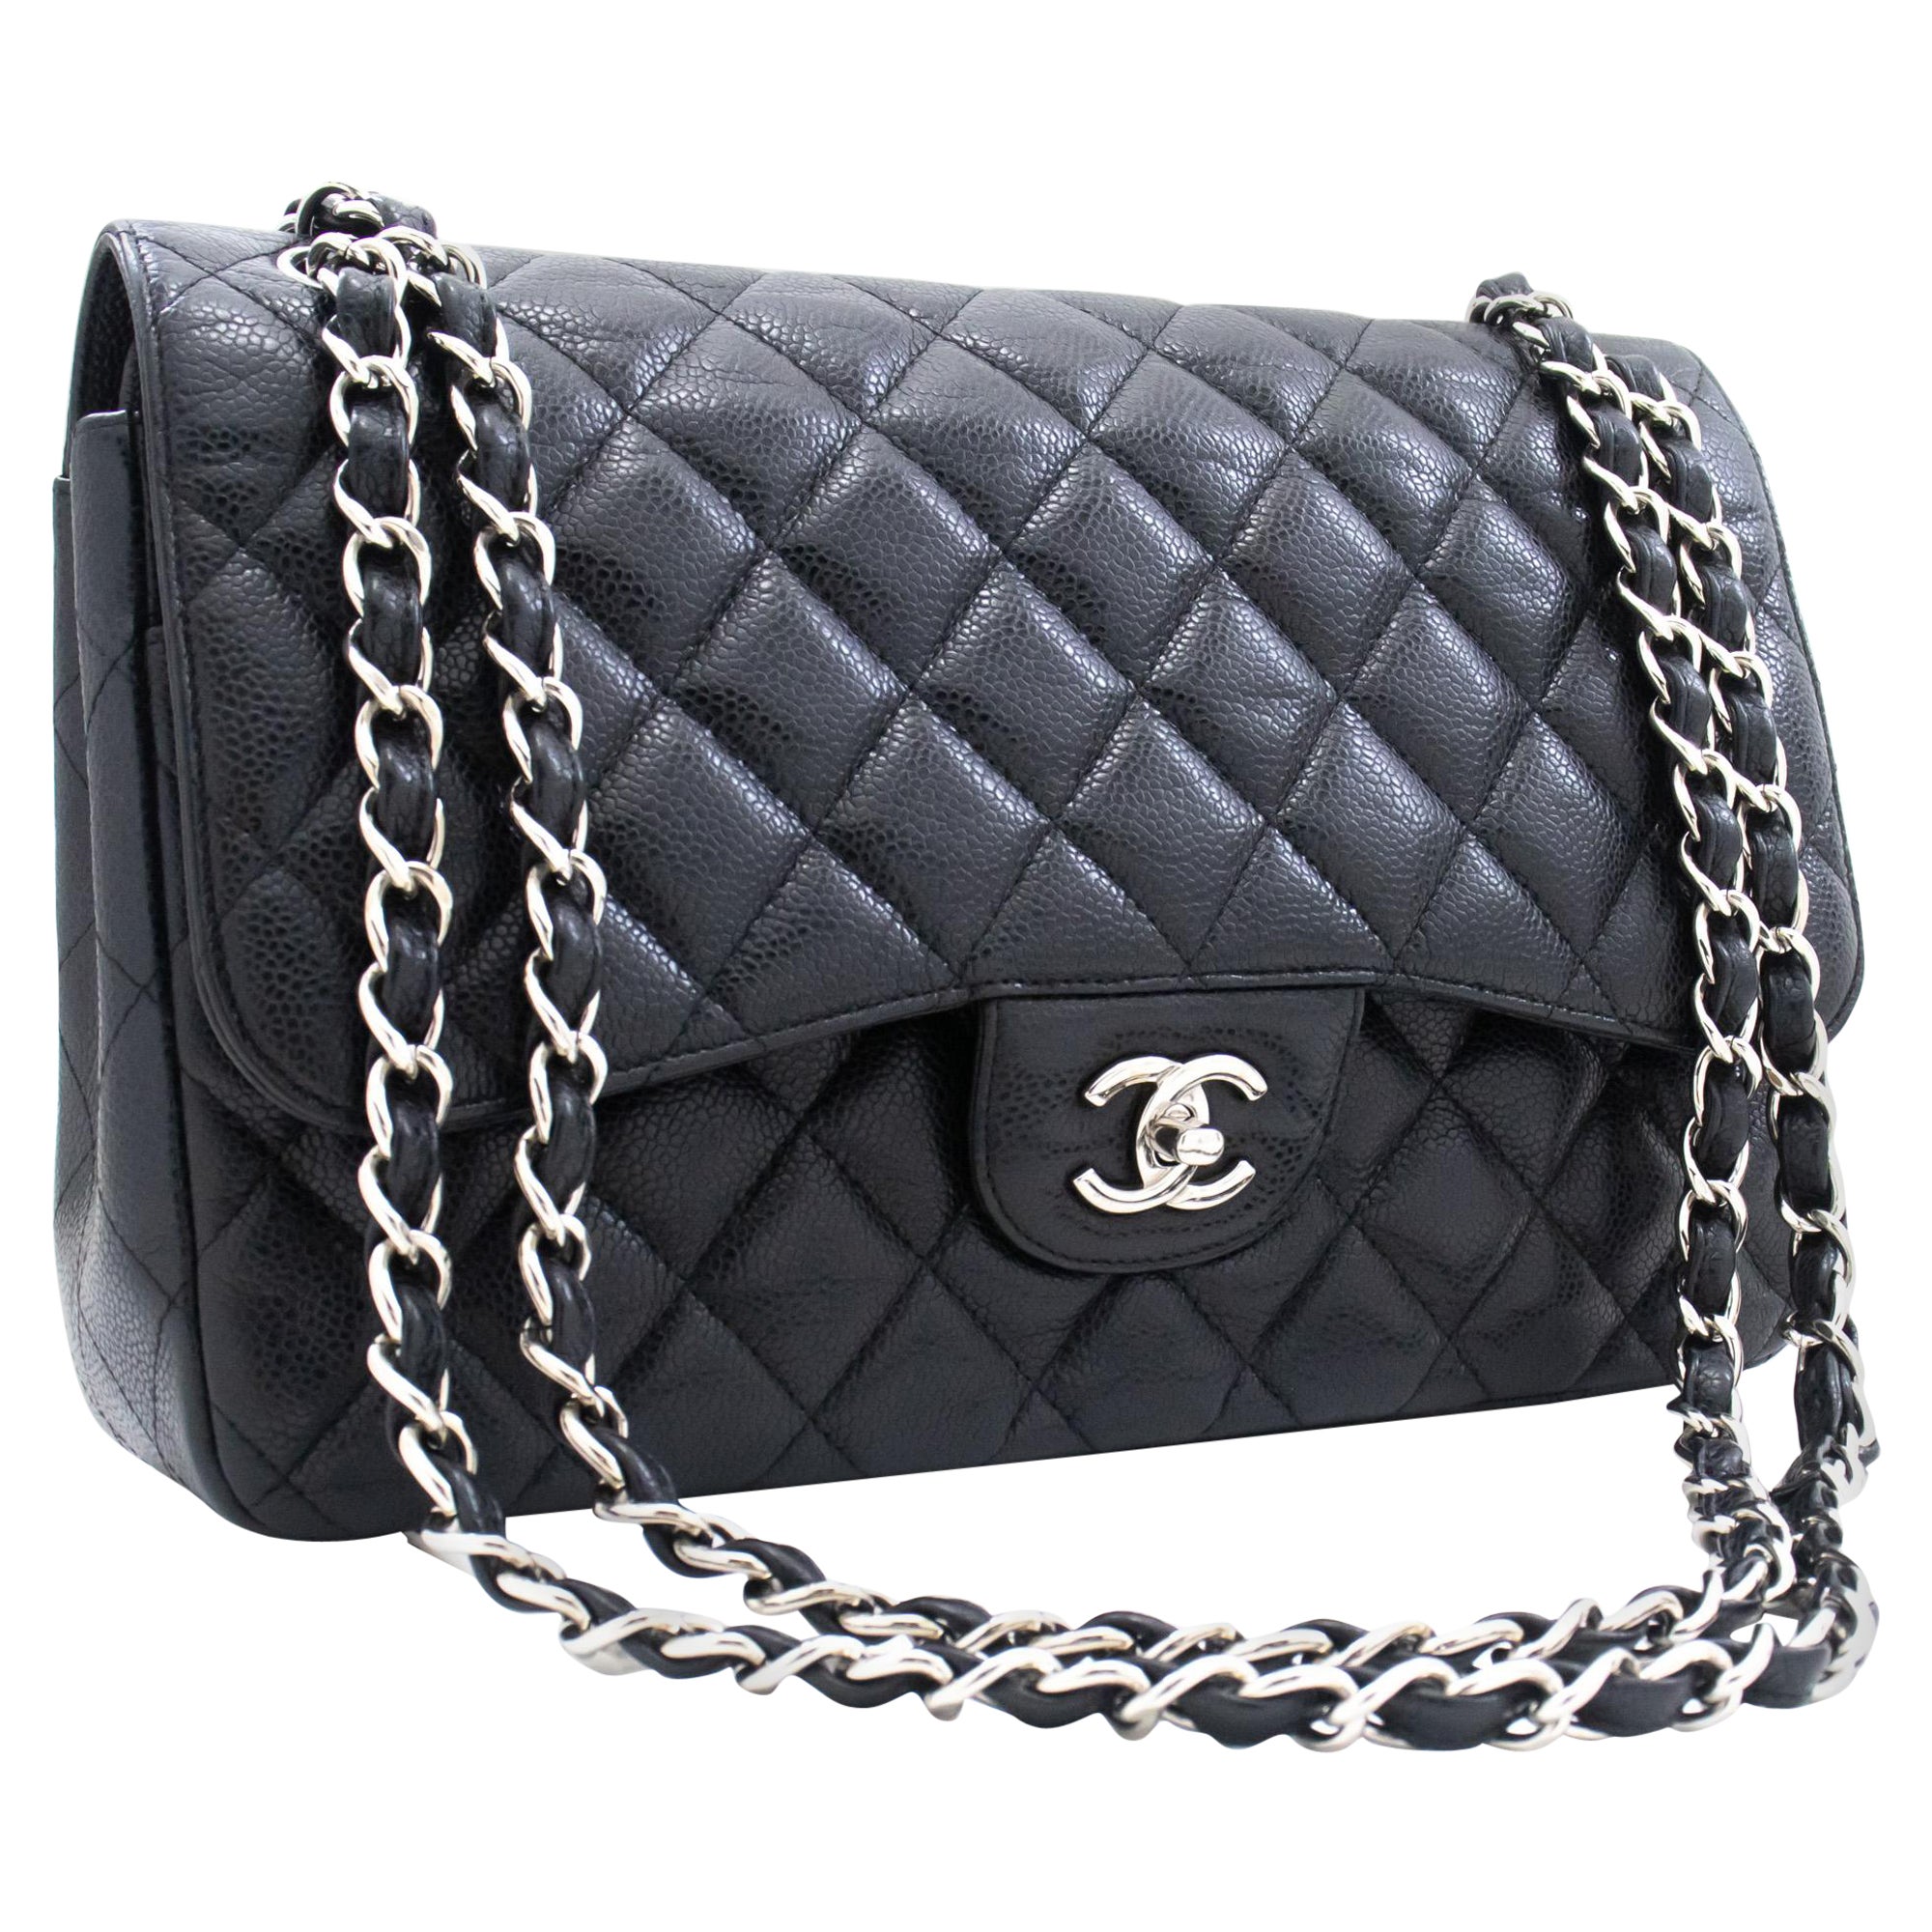 CHANEL Grained Calfskin Large Chain Shoulder Bag W Flap SV Classic For Sale